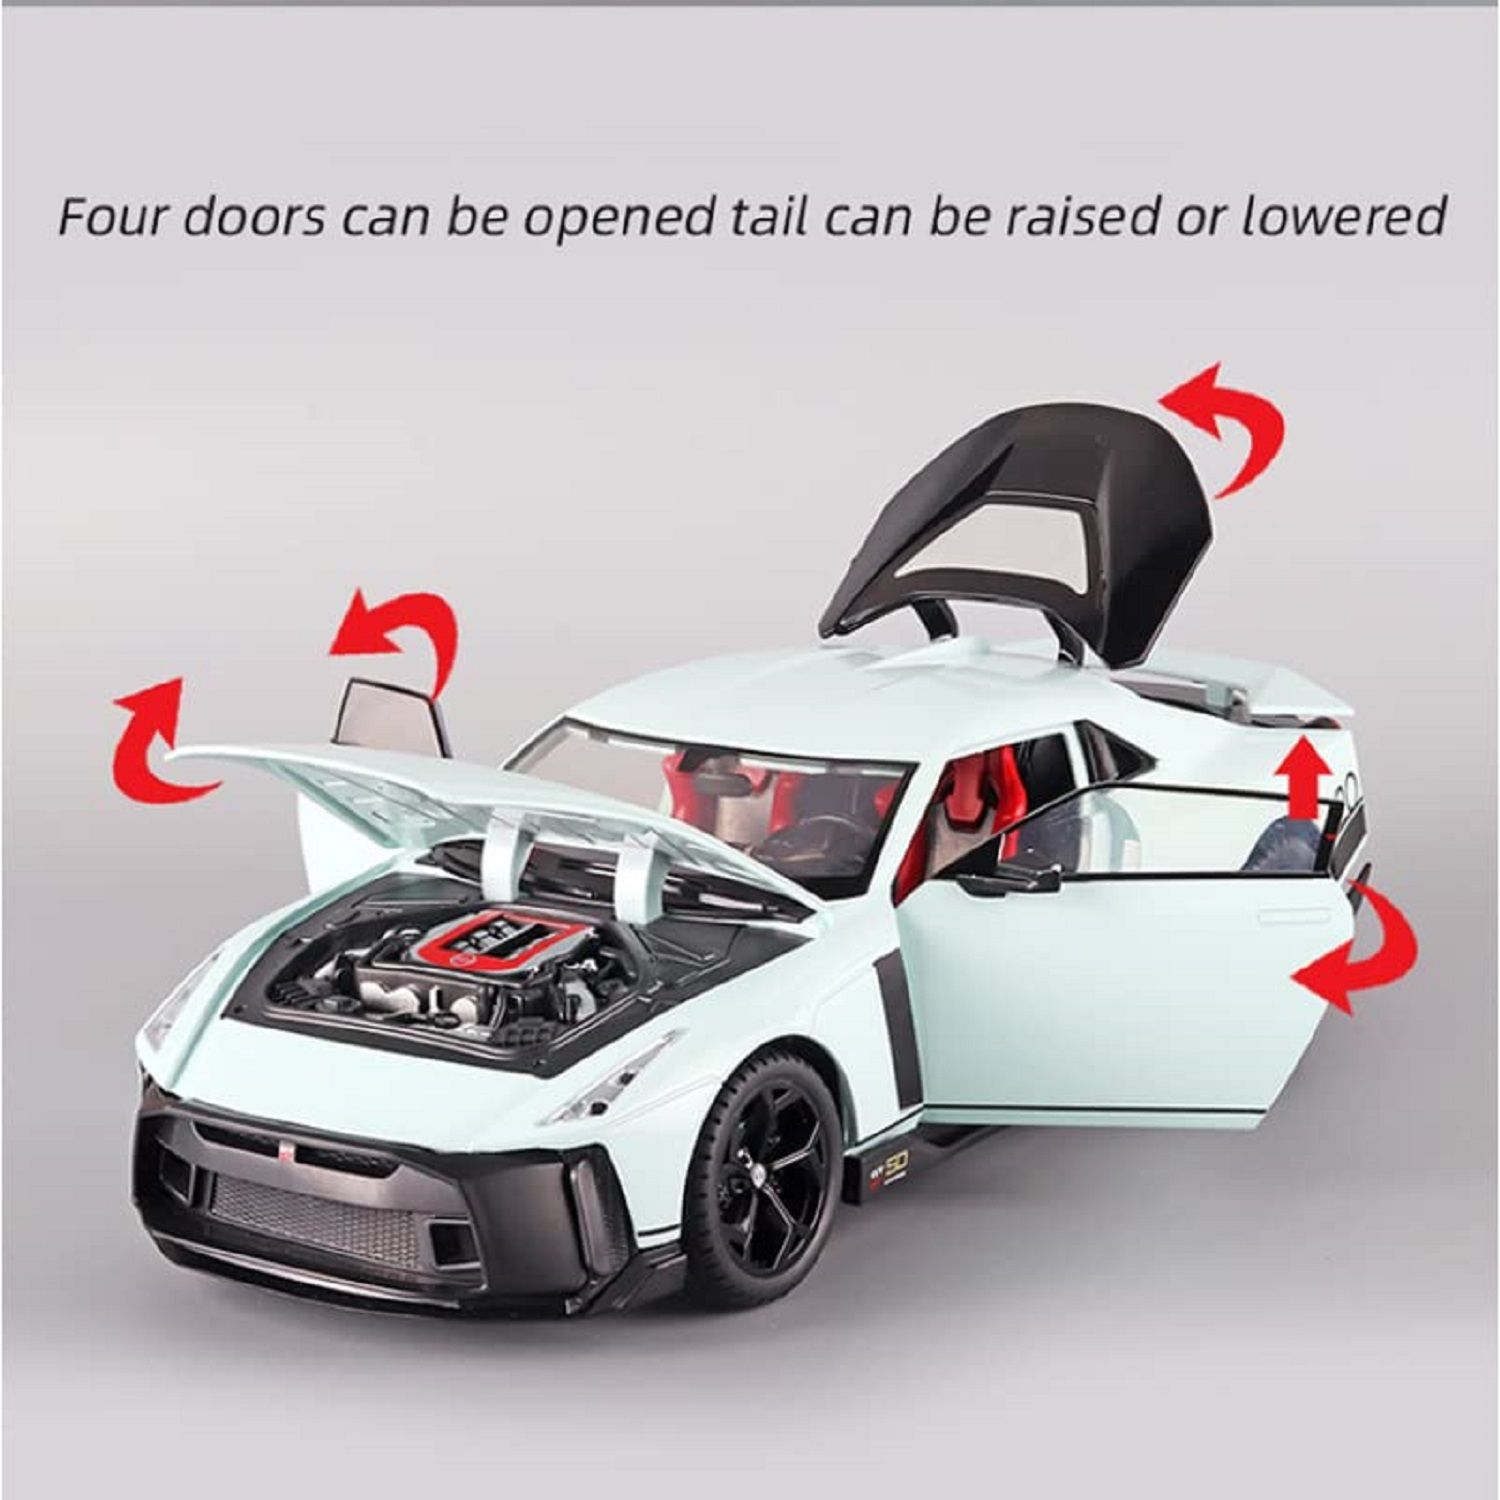 KTRS ENTERPRISE 1:24 Diecast Metal Pullback Toy car with Openable Doors & Light, Music Boys Gifts Toys for Kids【Colors as Per Stock】 (Nissan GT-R50)